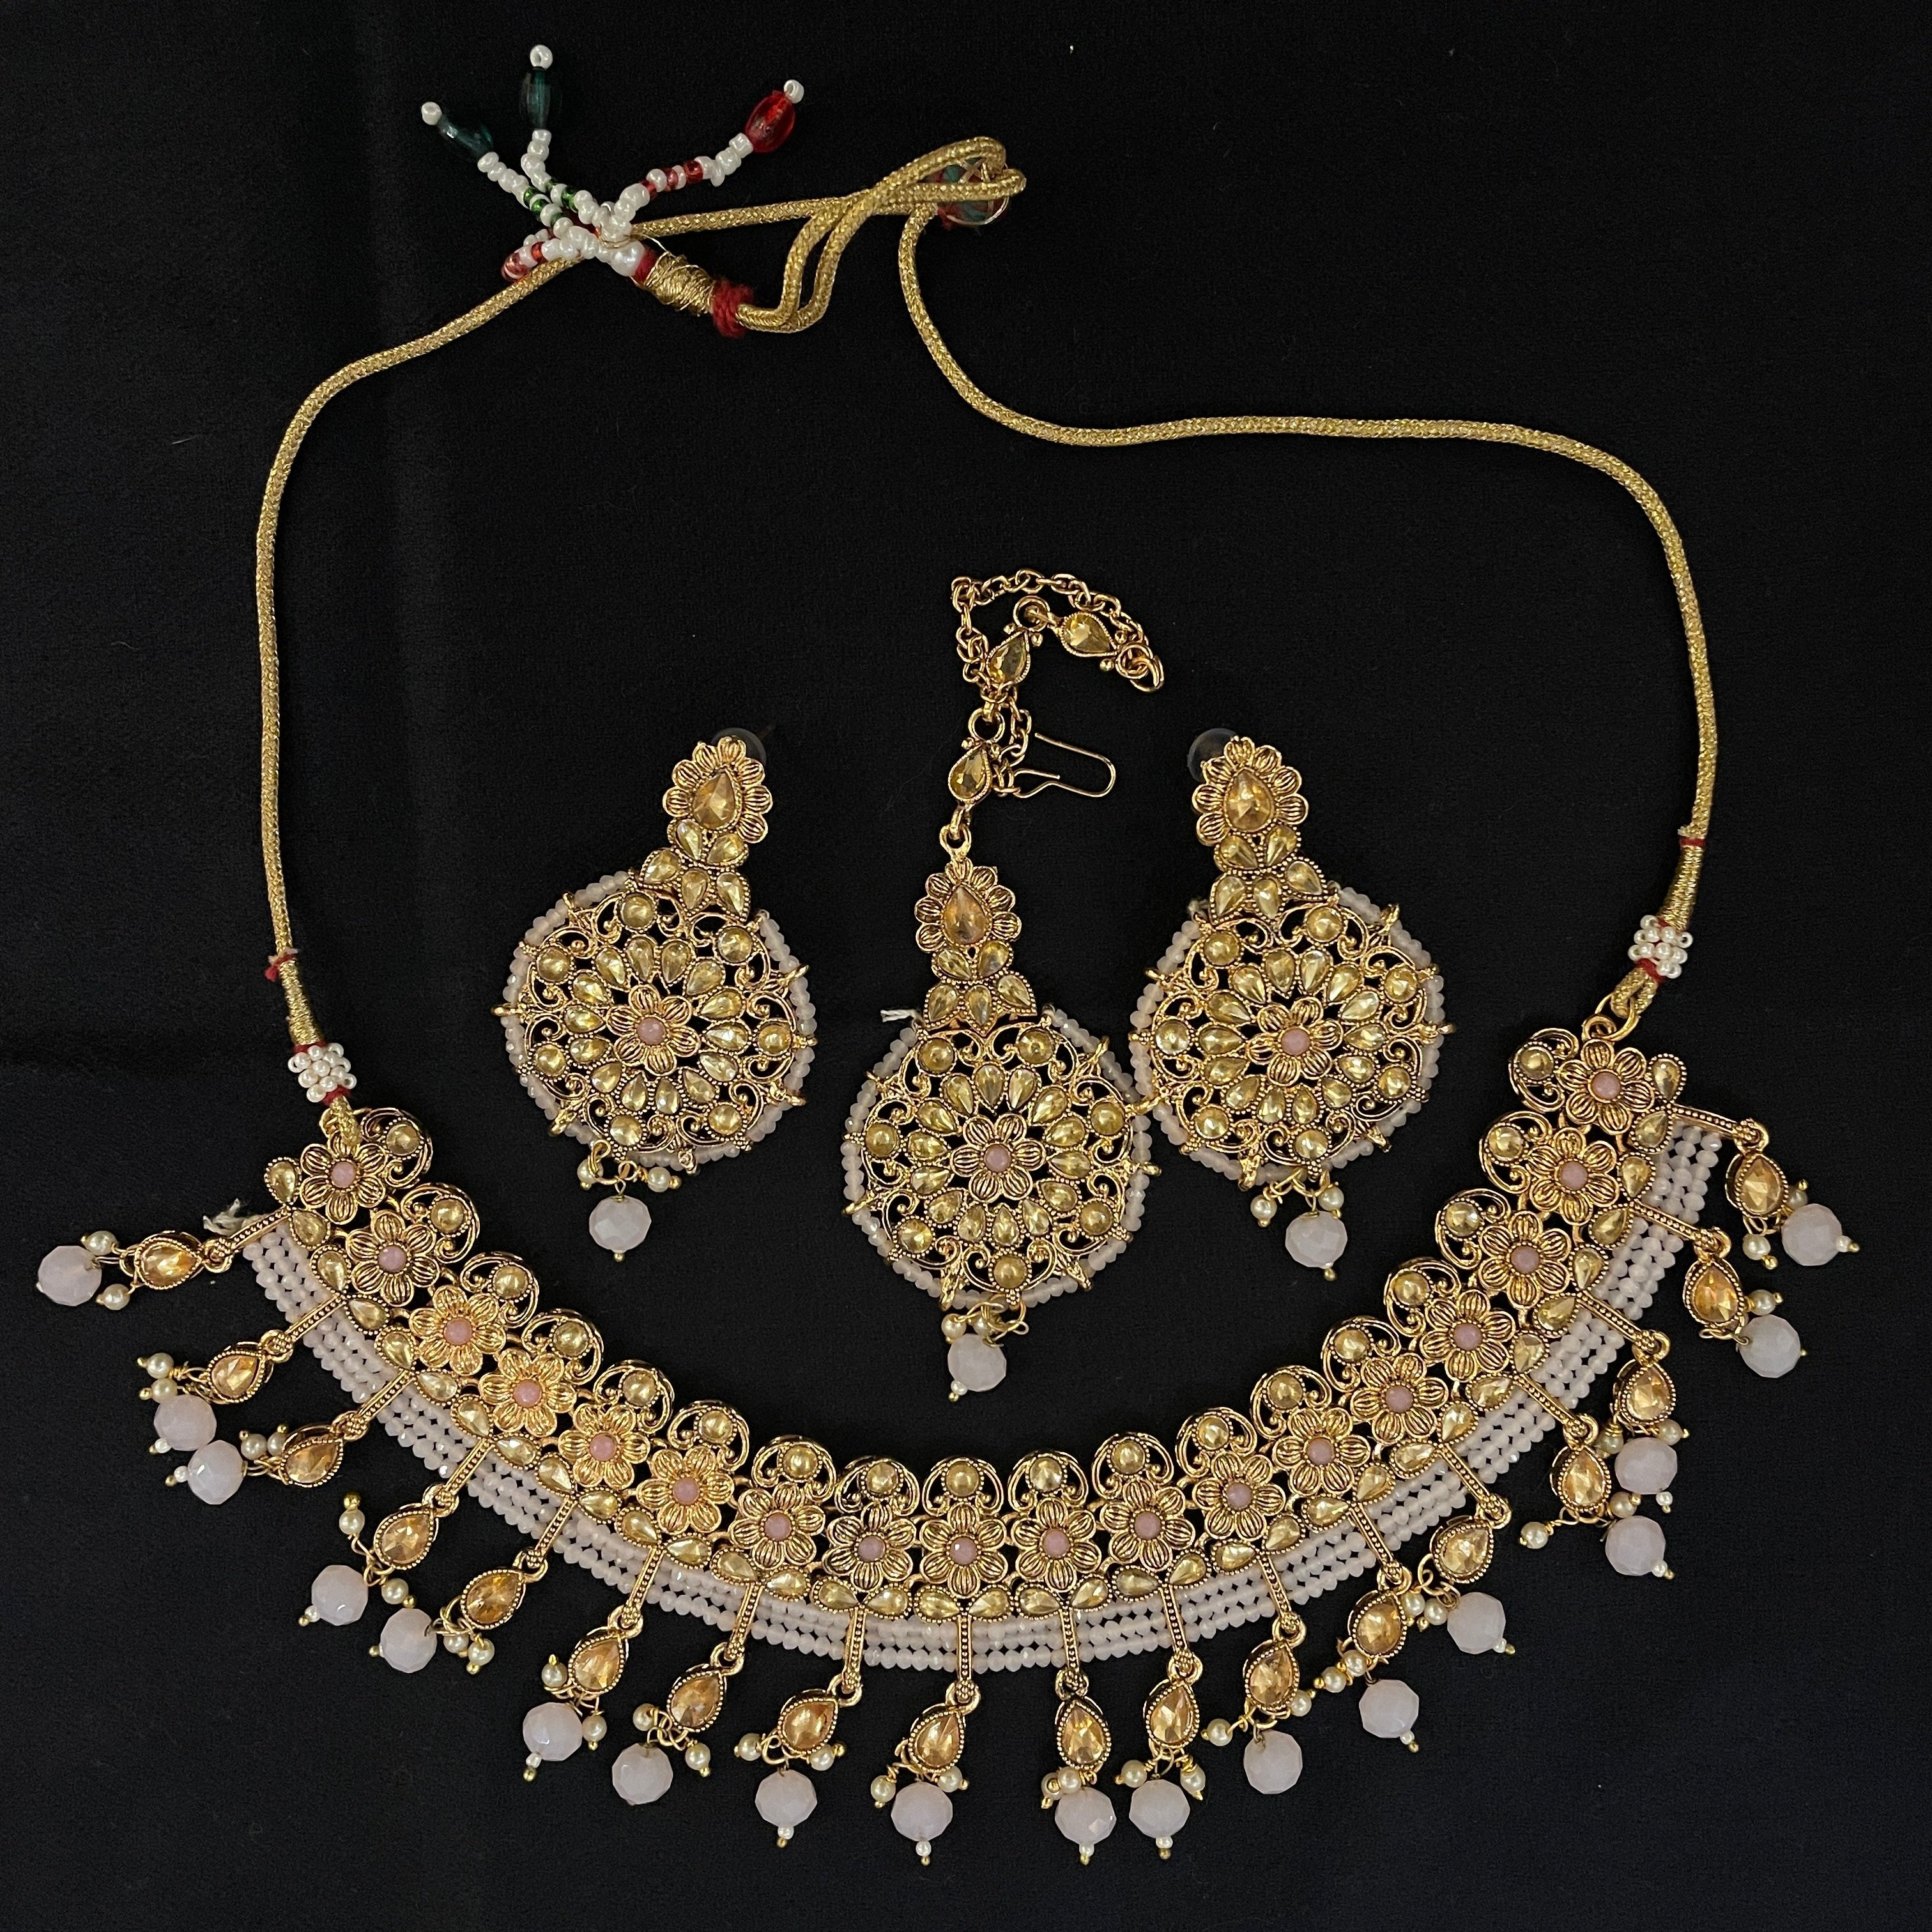 DT Flower Beaded Necklace Sets - Vintage India NYC